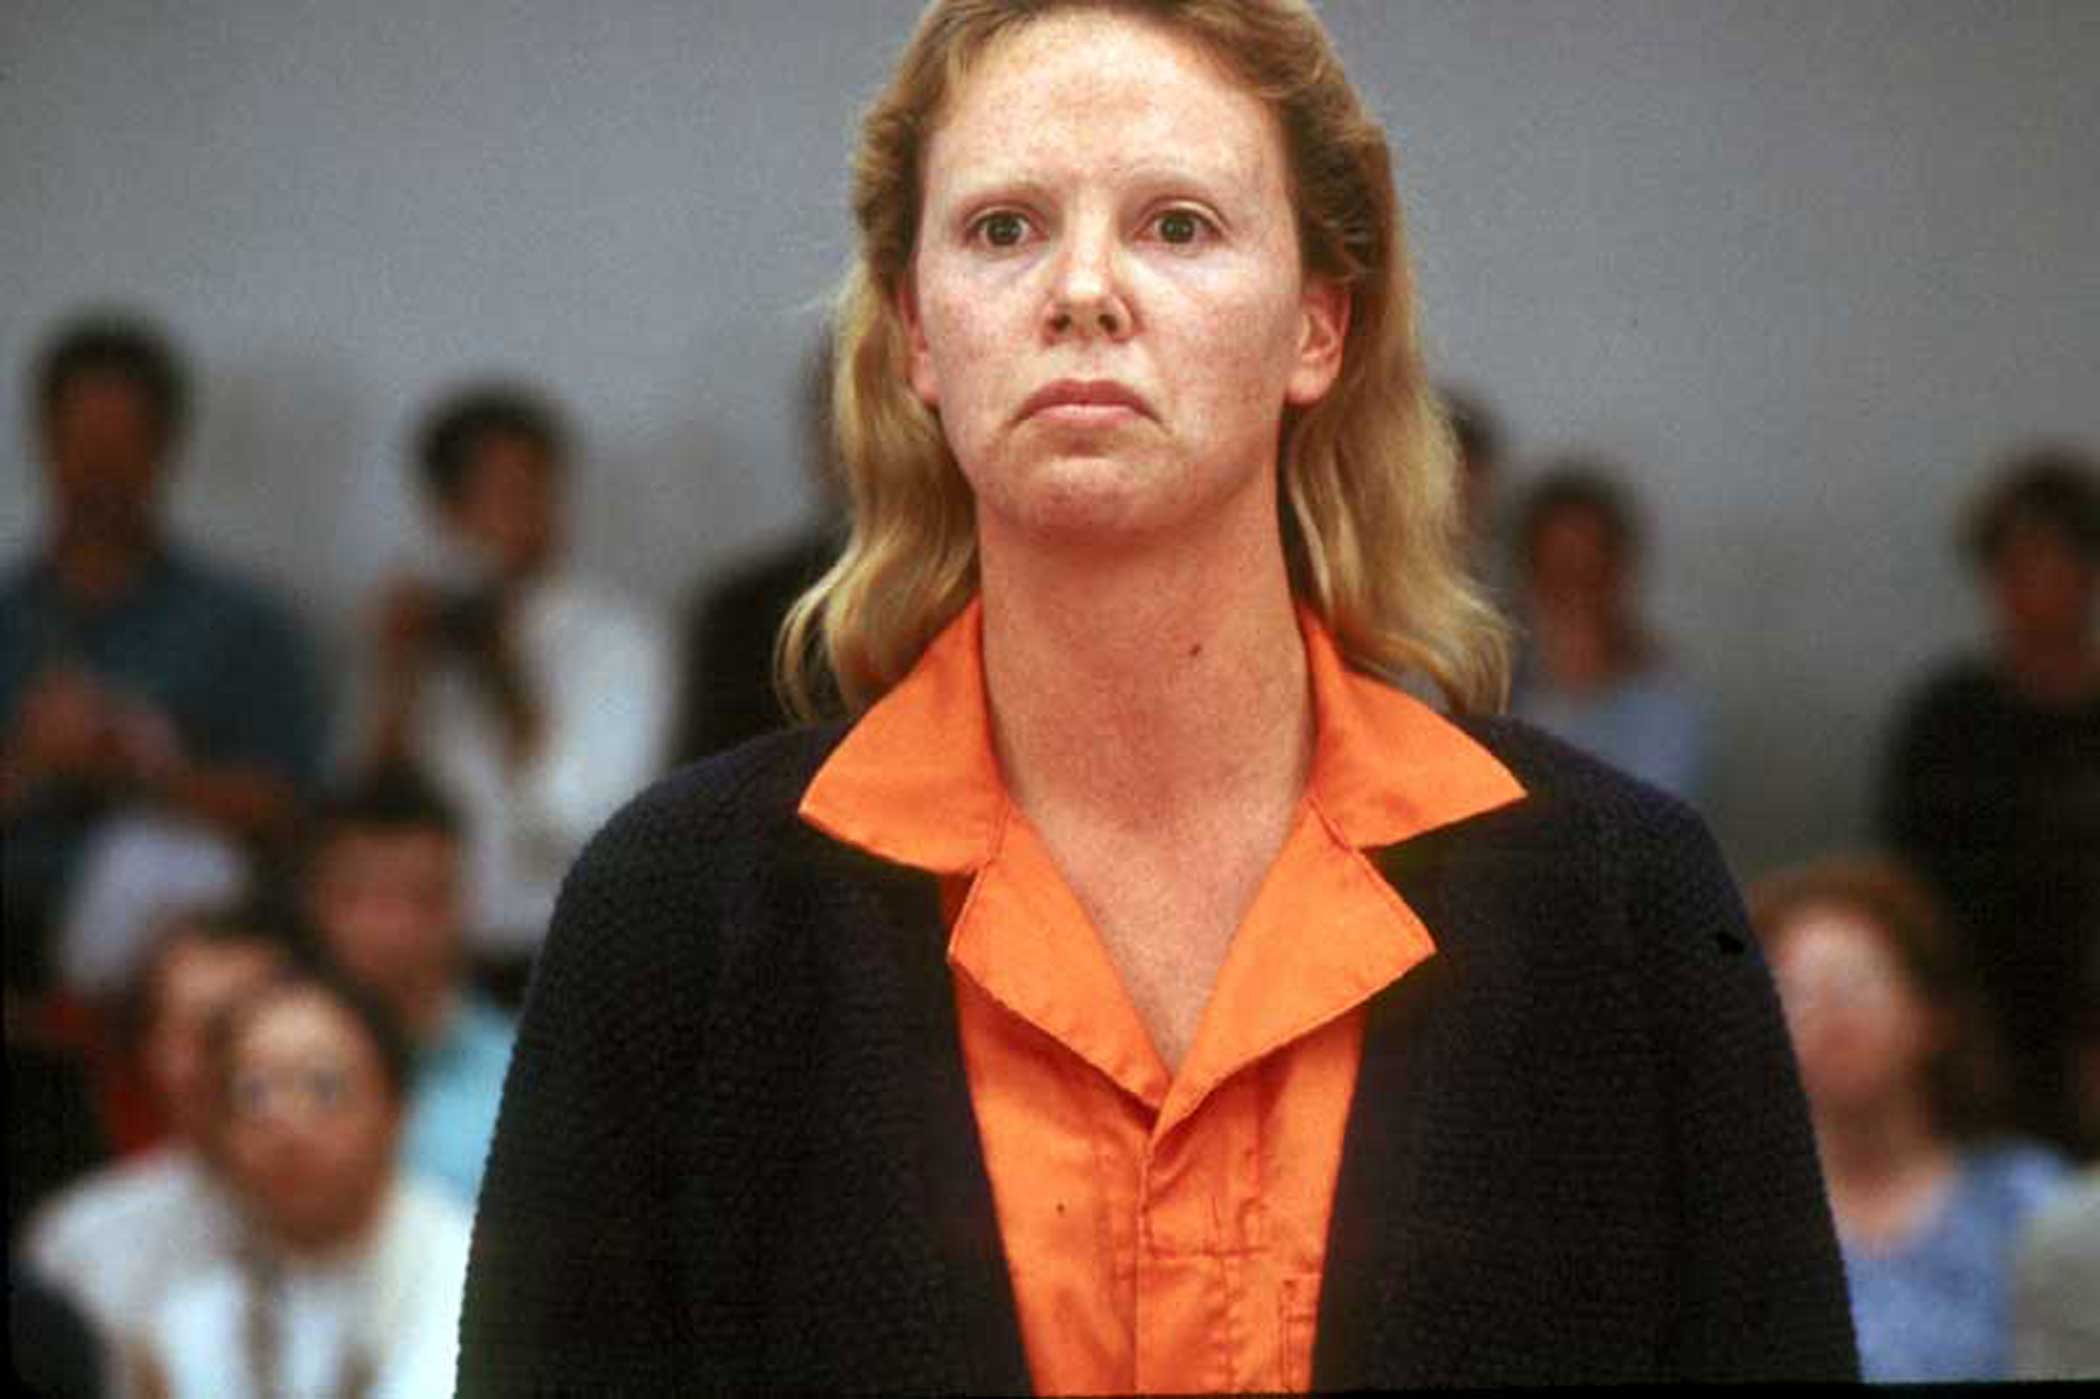 Monster, 2003 In this film, Charlize Theron chillingly portrays former prostitute Aileen Wuornos, a serial killer who was executed in 2002 in Florida for killing six men. Since capital punishment was restored in 1976, Wuornos was the tenth woman to be executed.